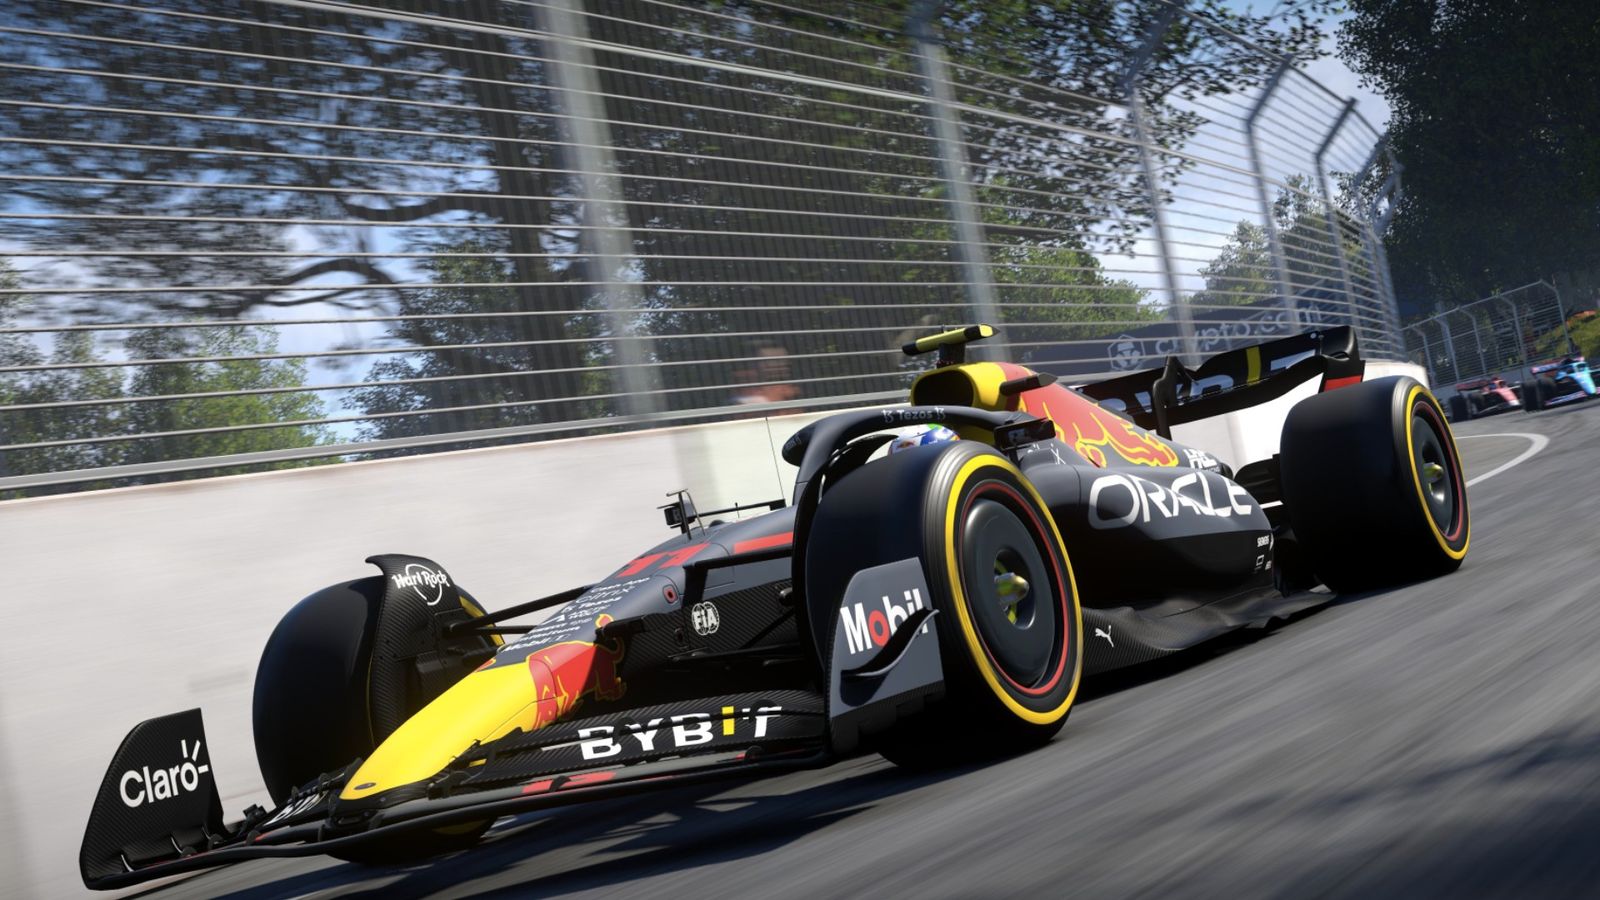 Image of a Red Bull car in F1 22.